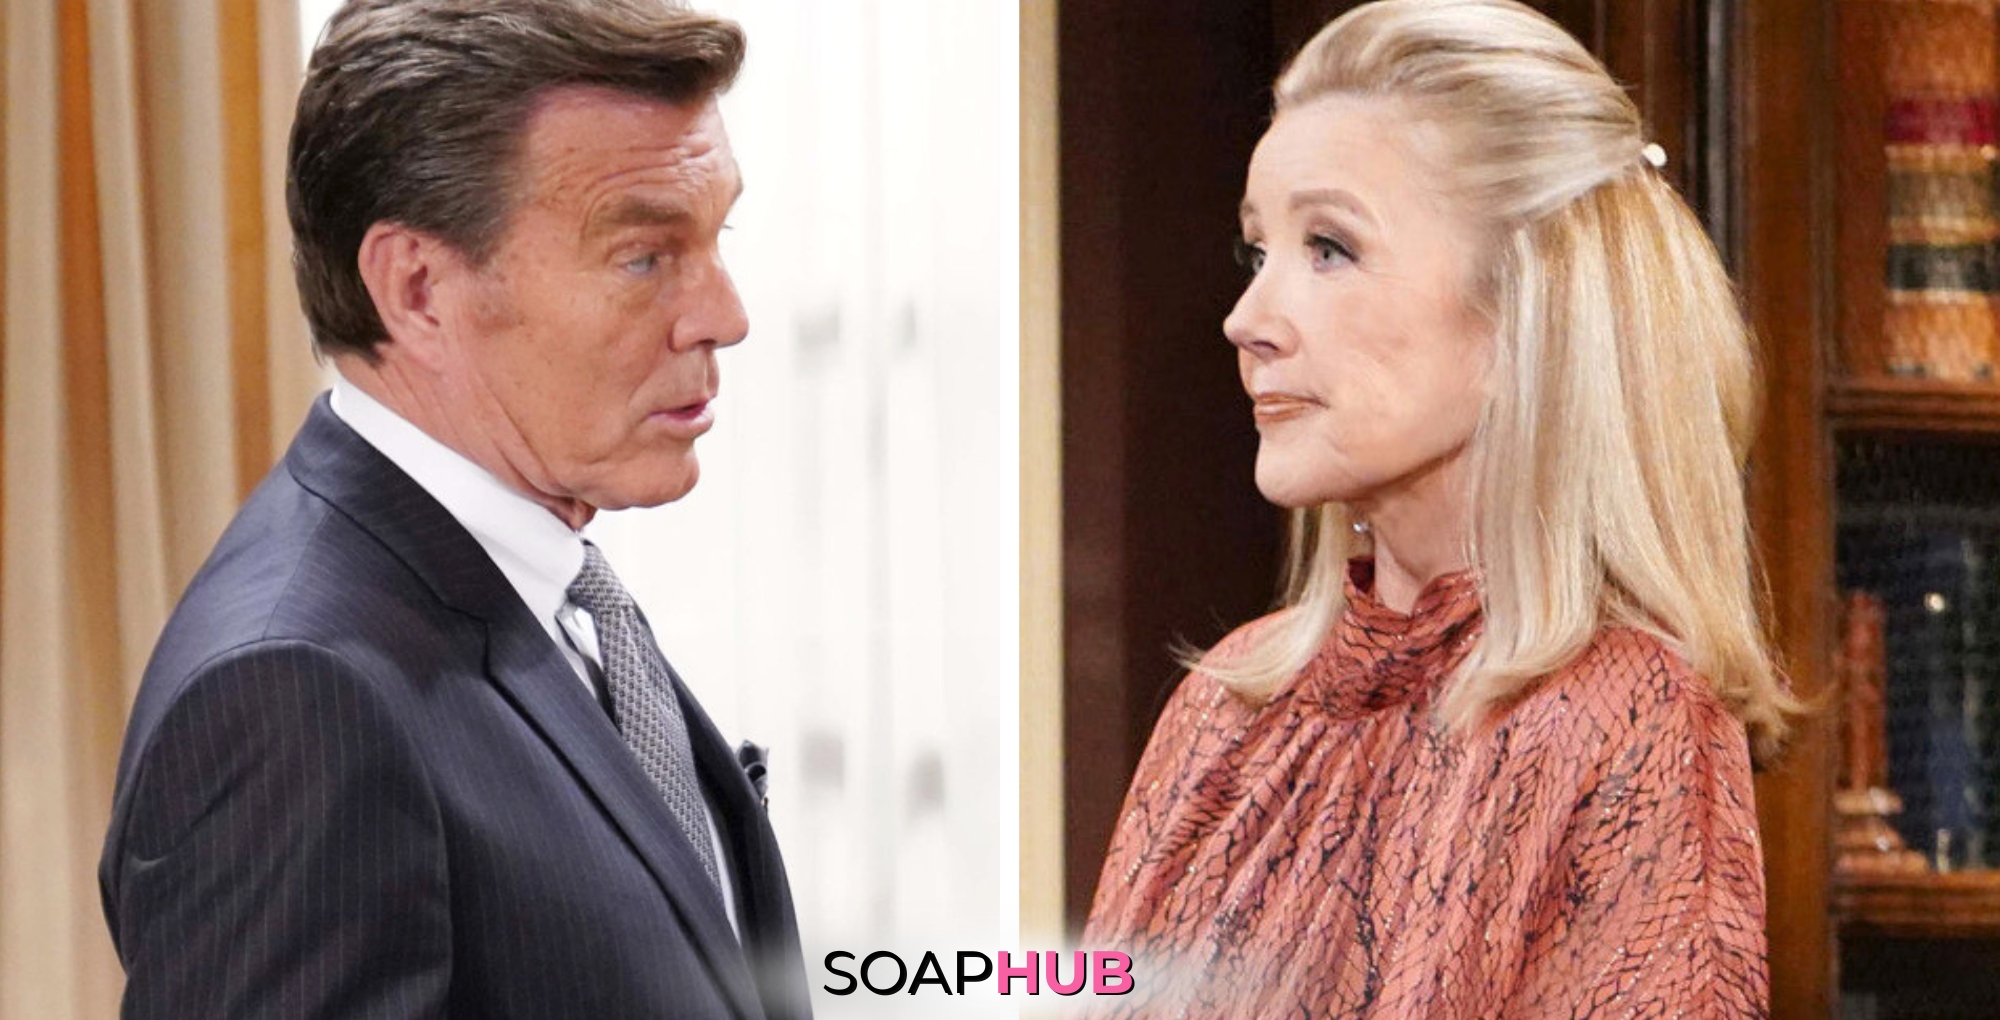 The Young and the Restless spoilers for July 2 with Jack and Nikki and the Soap Hub logo.